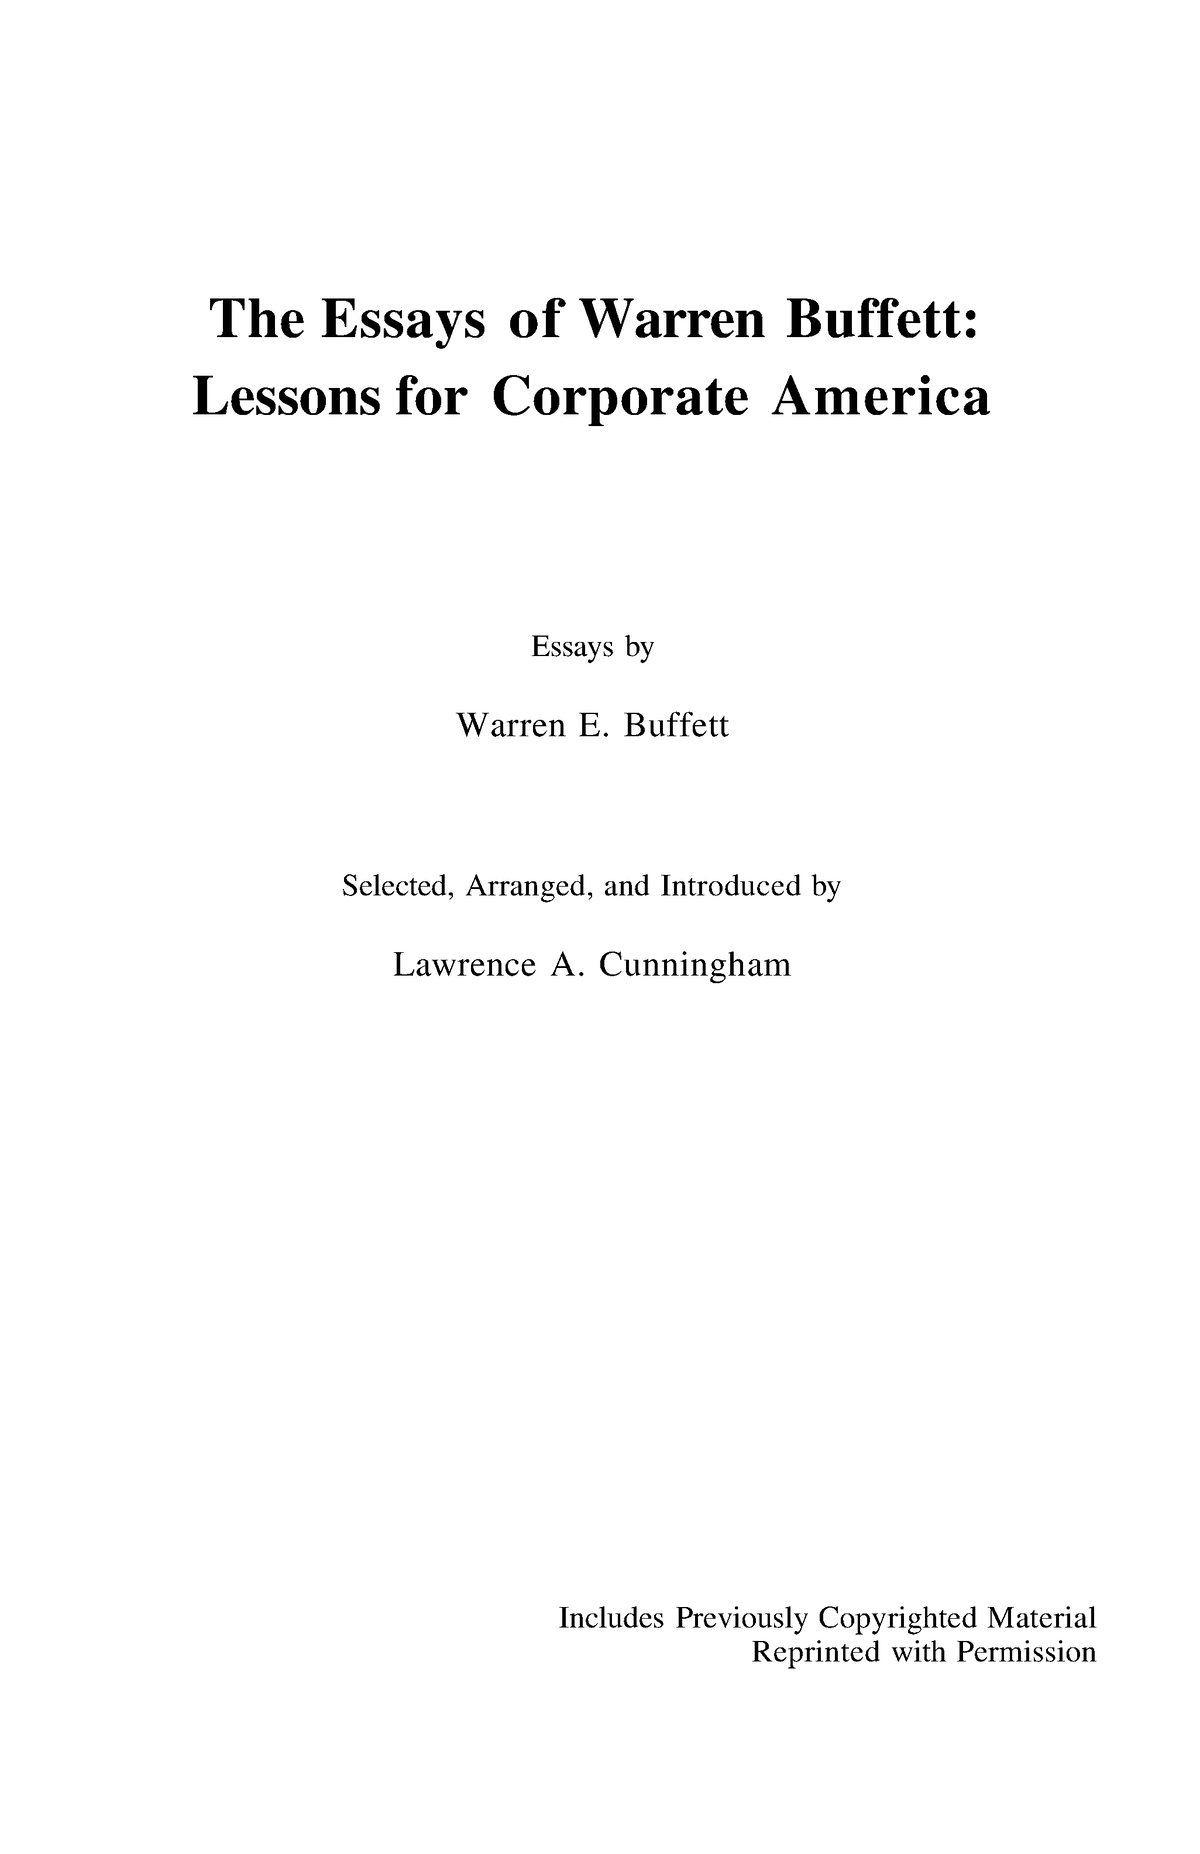 the essays of warren buffett lessons for corporate america summary